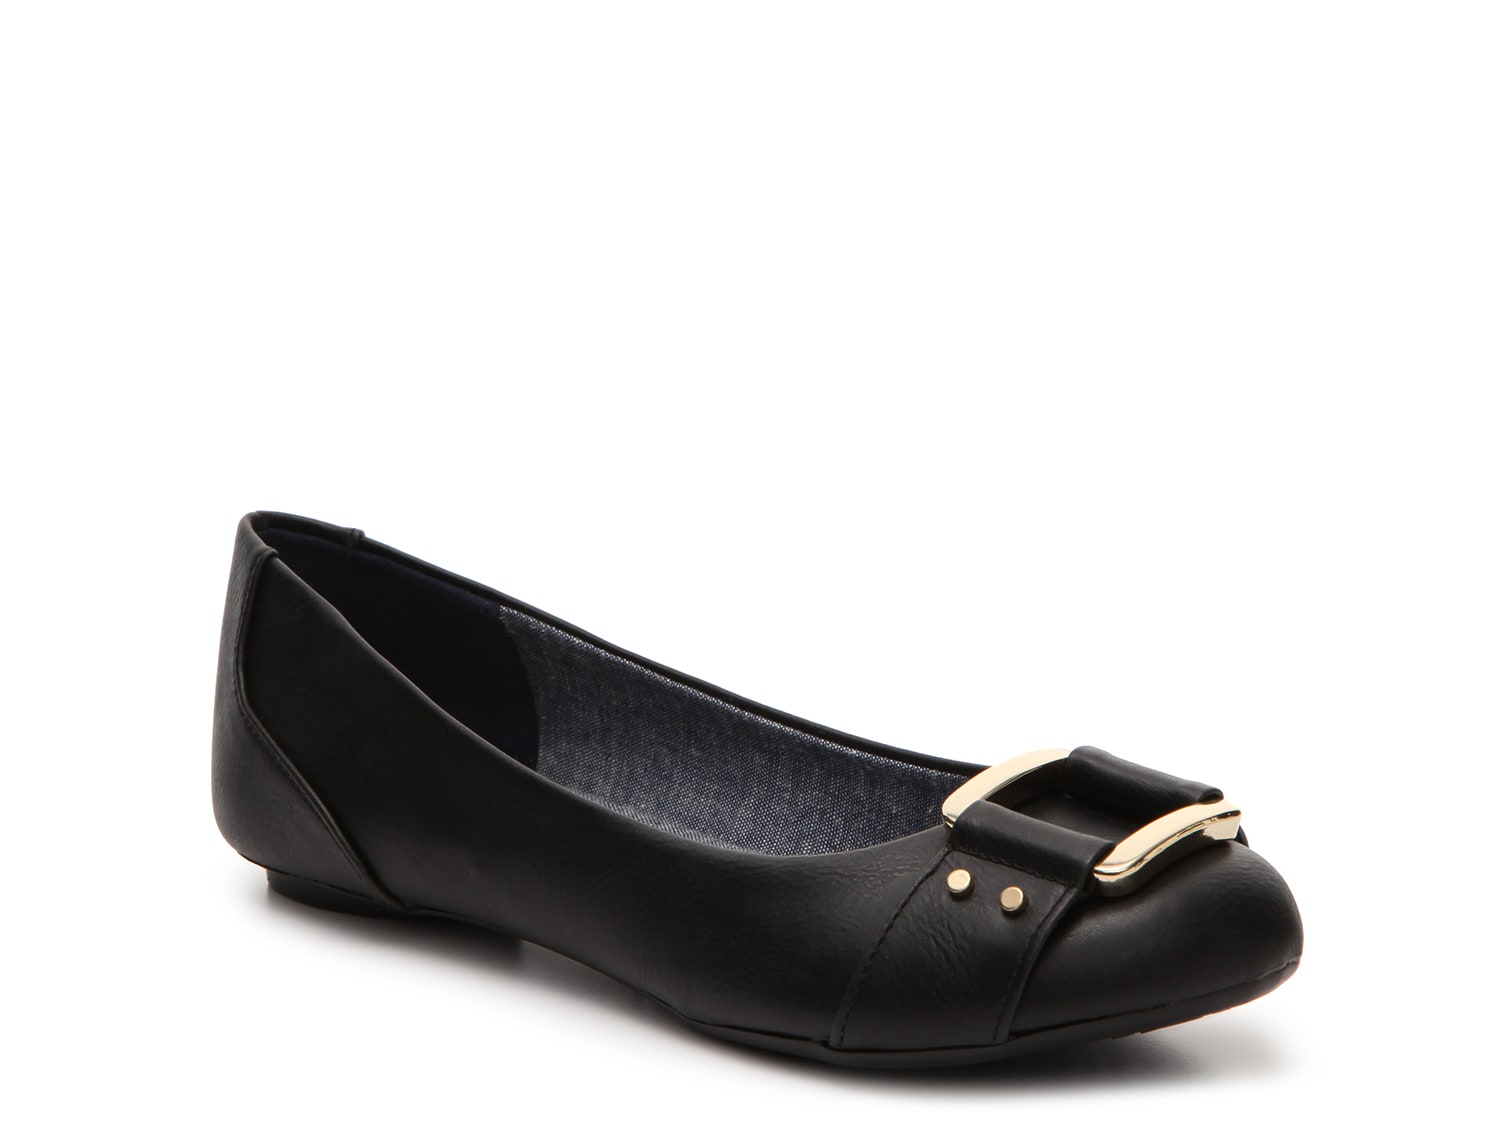 Dr. Scholl's Frankie Ballet Flat - Free Shipping | DSW